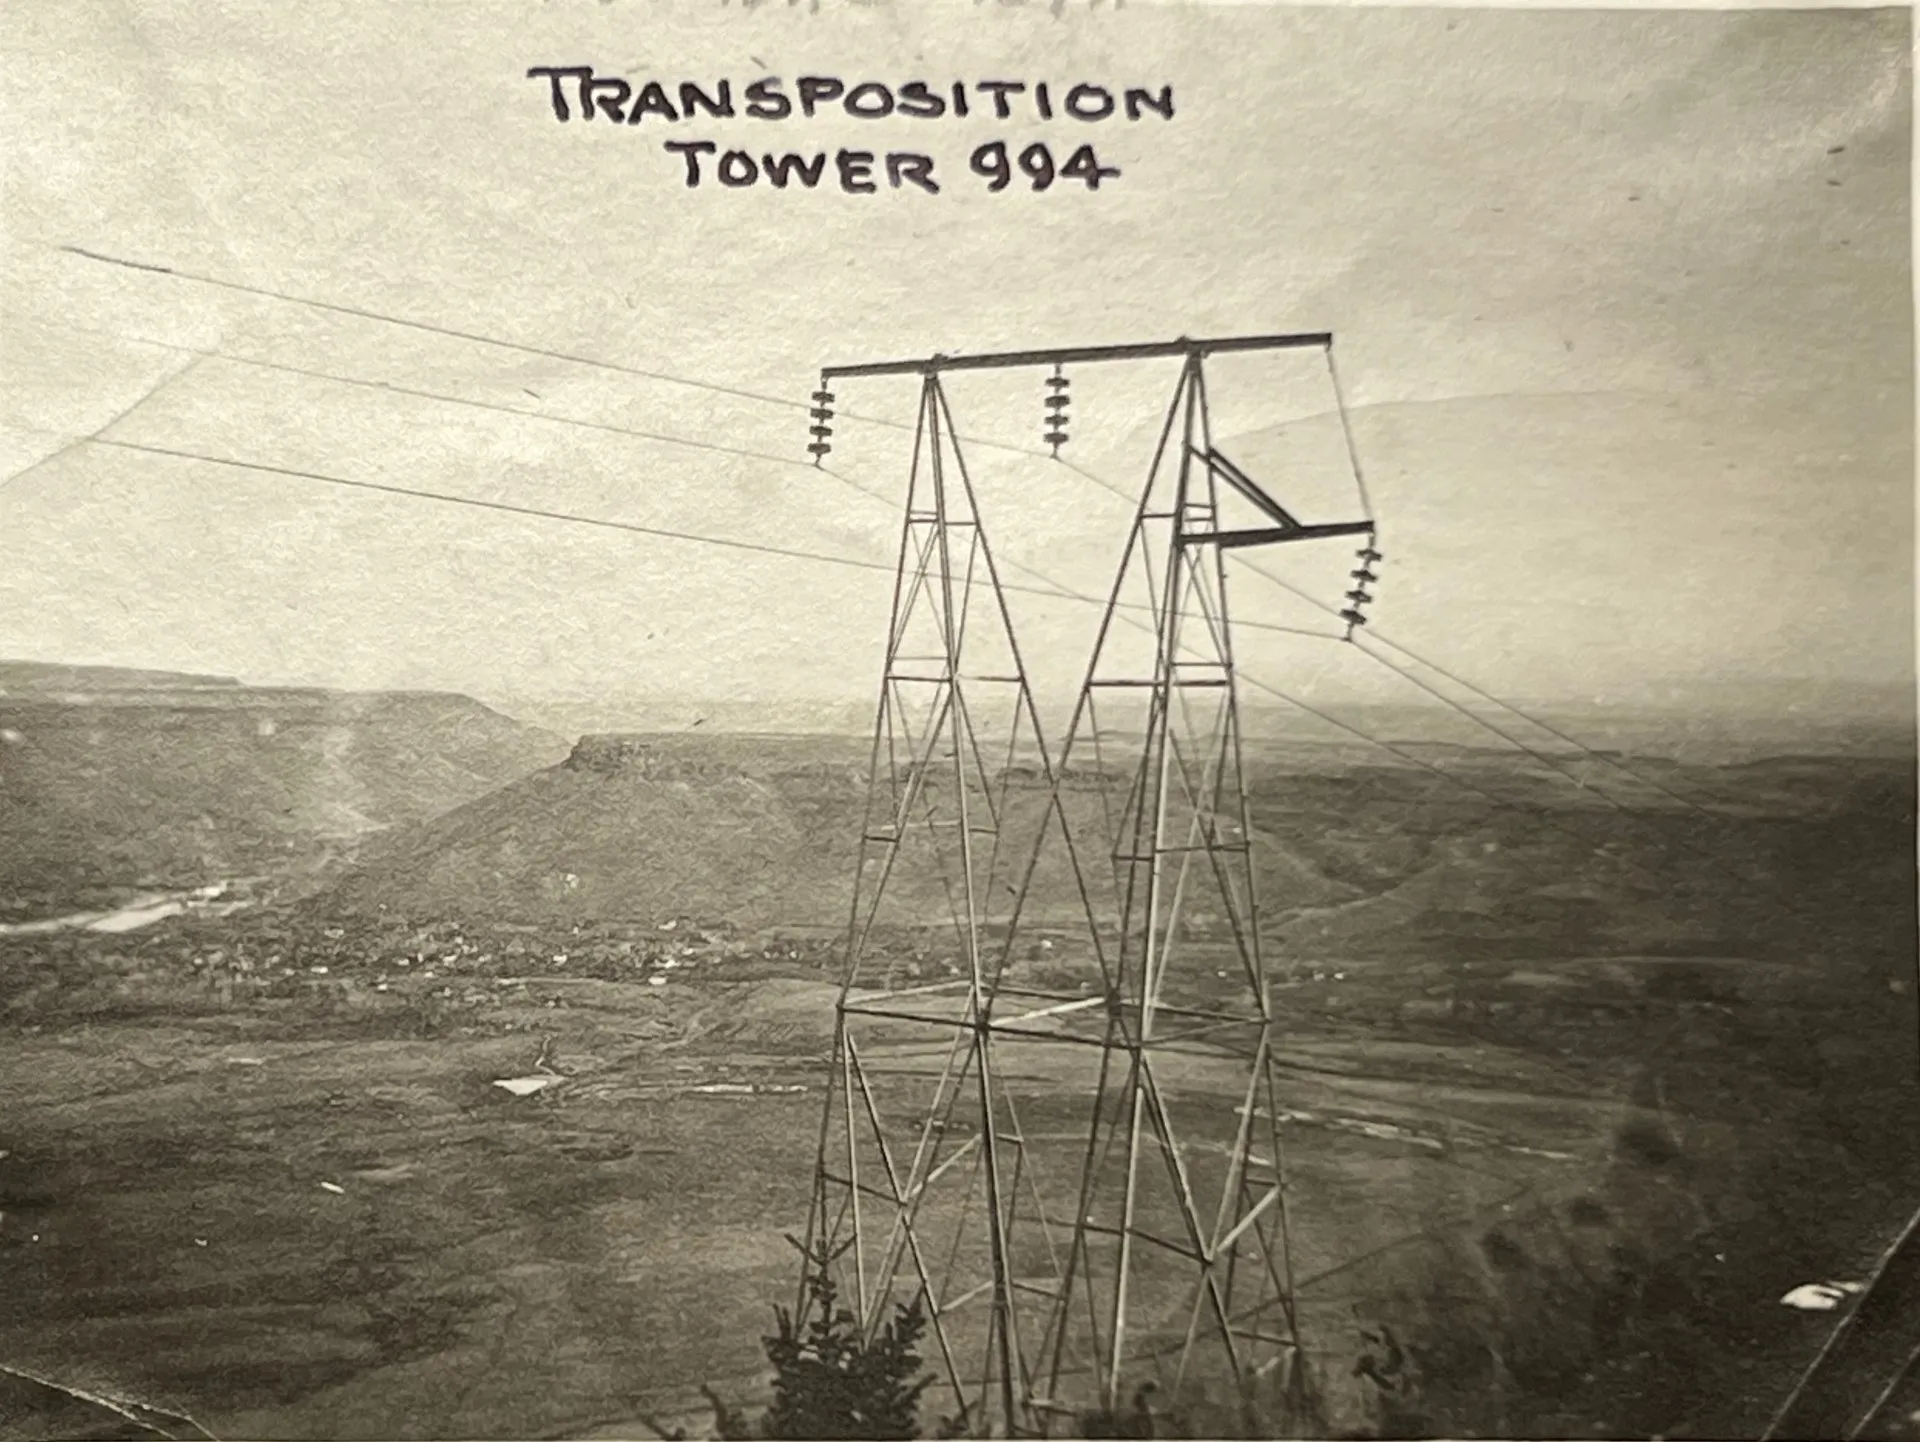 Electrical transmission tower on Lookout Mountain - North and South Table Mountains in the background